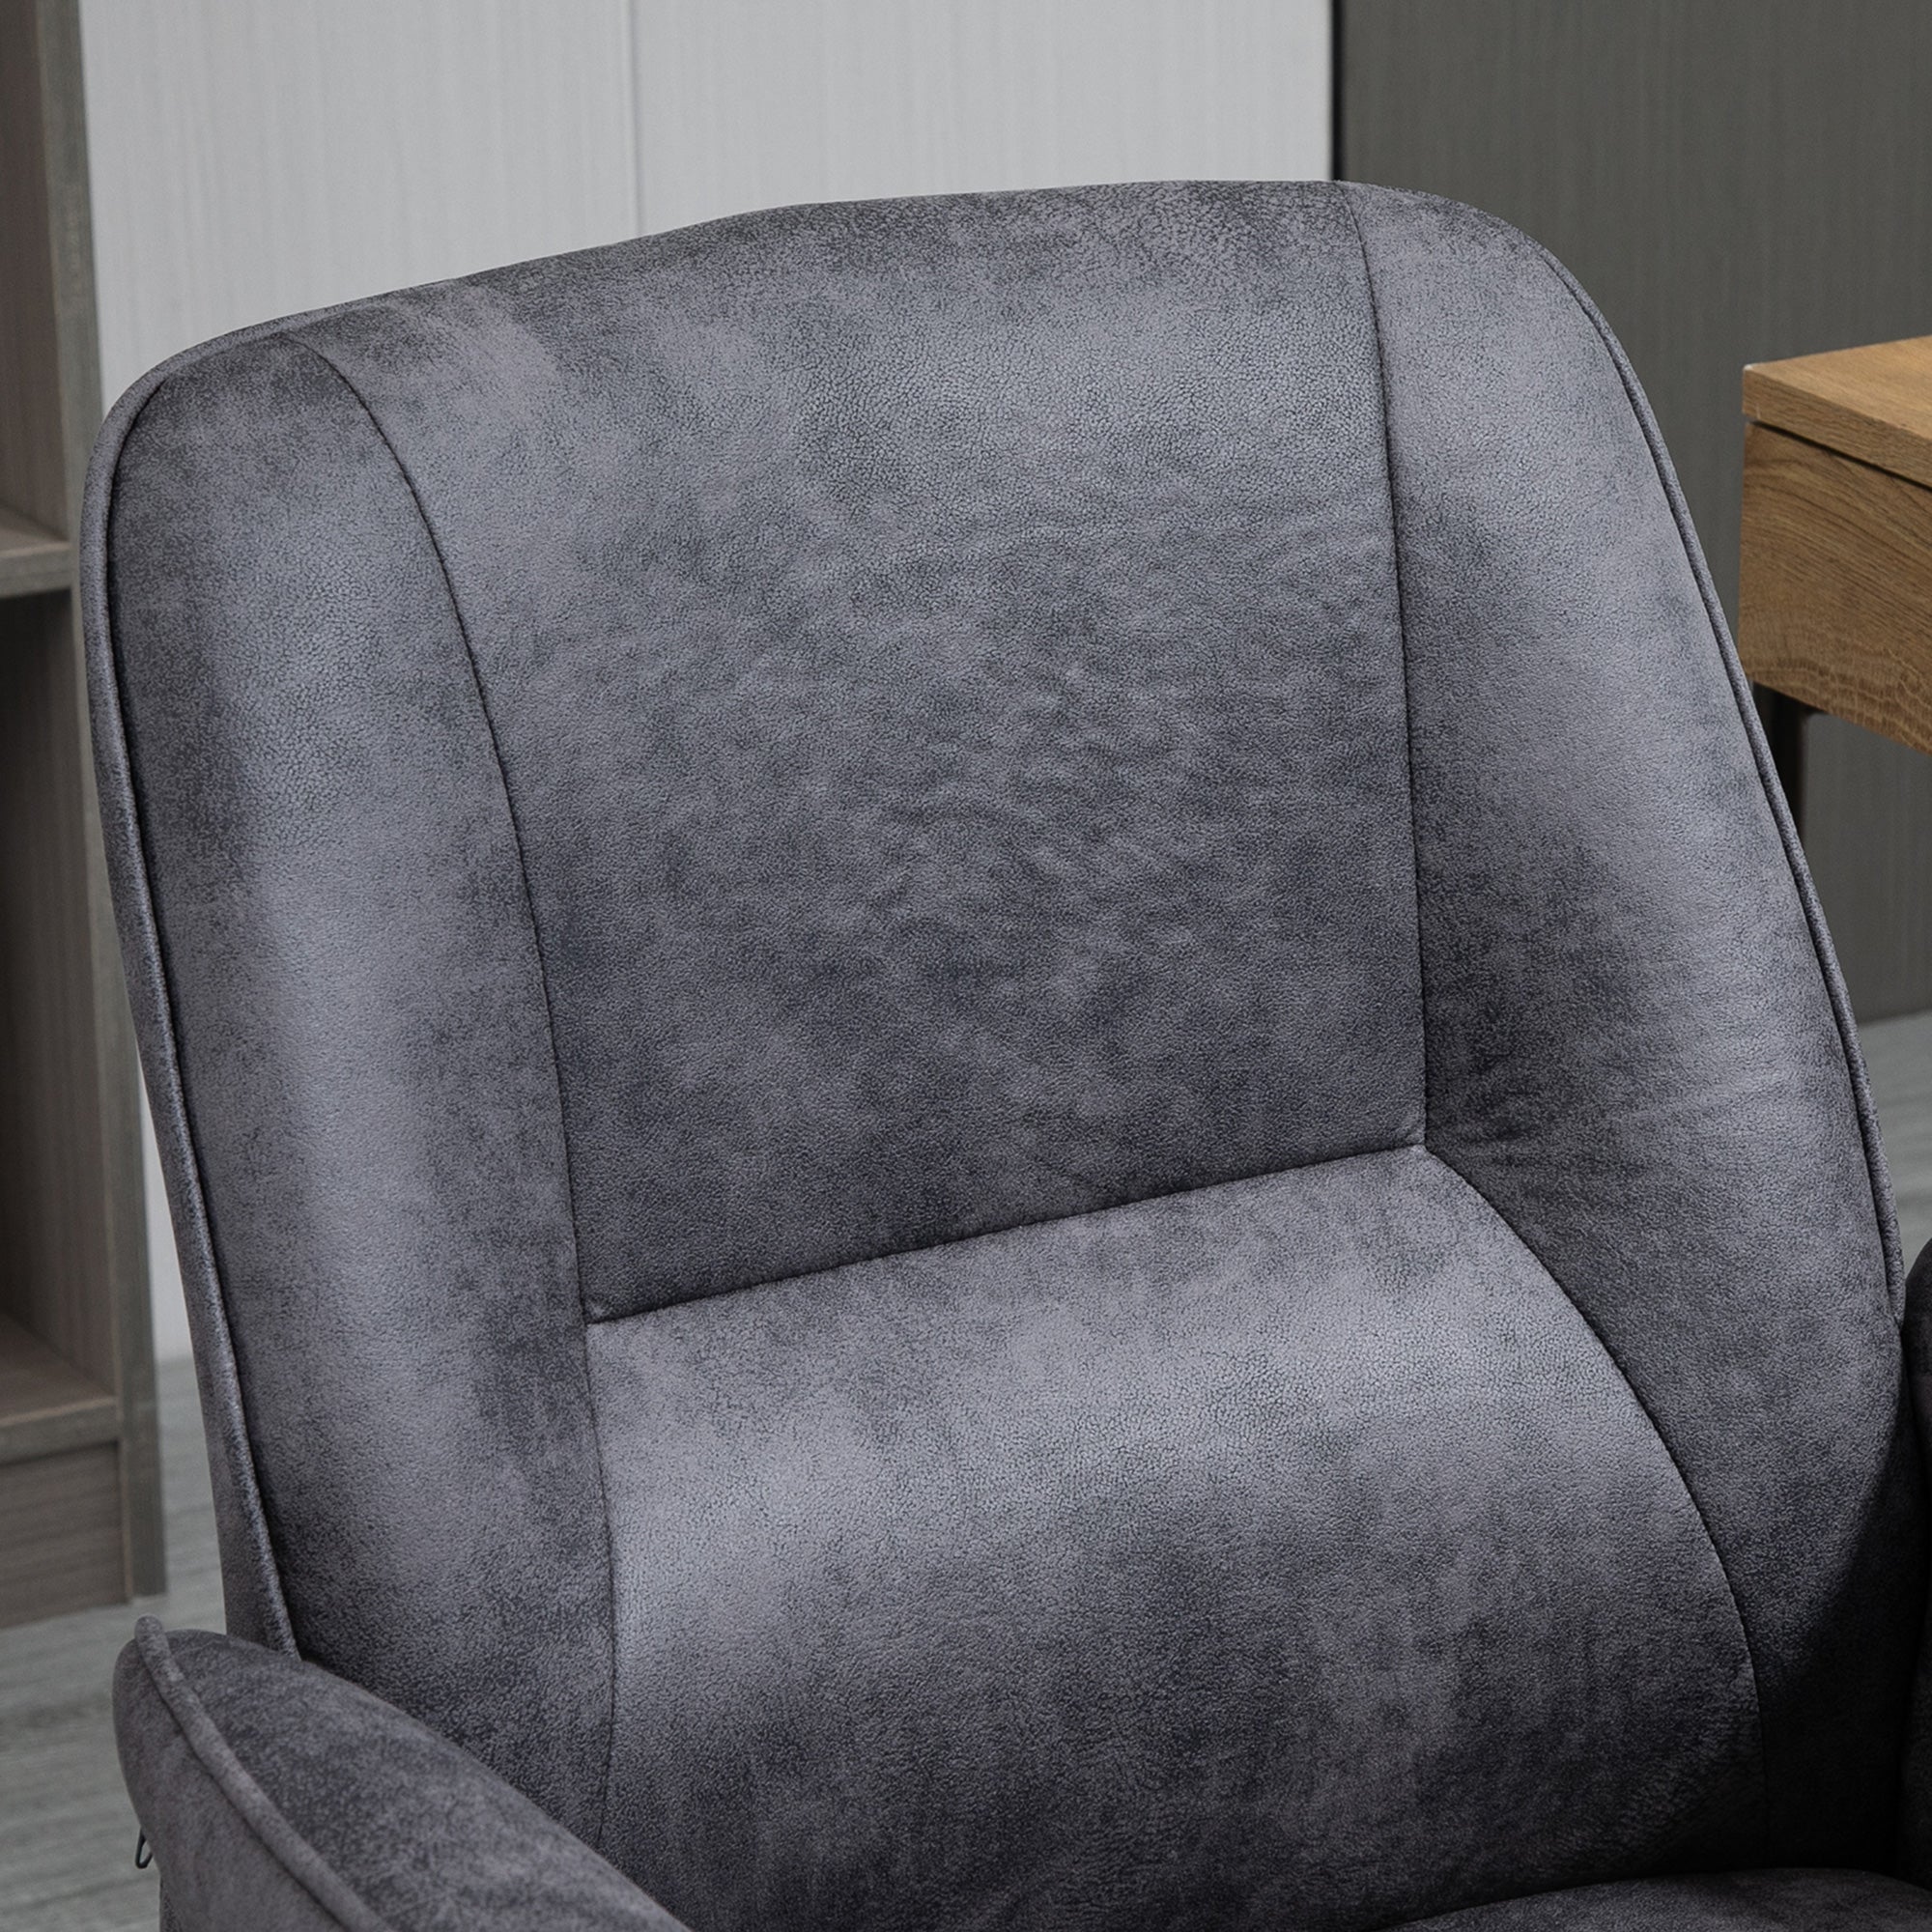 Vinsetto Swivel Computer Office Chair Mid Back Desk Chair for Home Study Bedroom, Charcoal Grey - TovaHaus